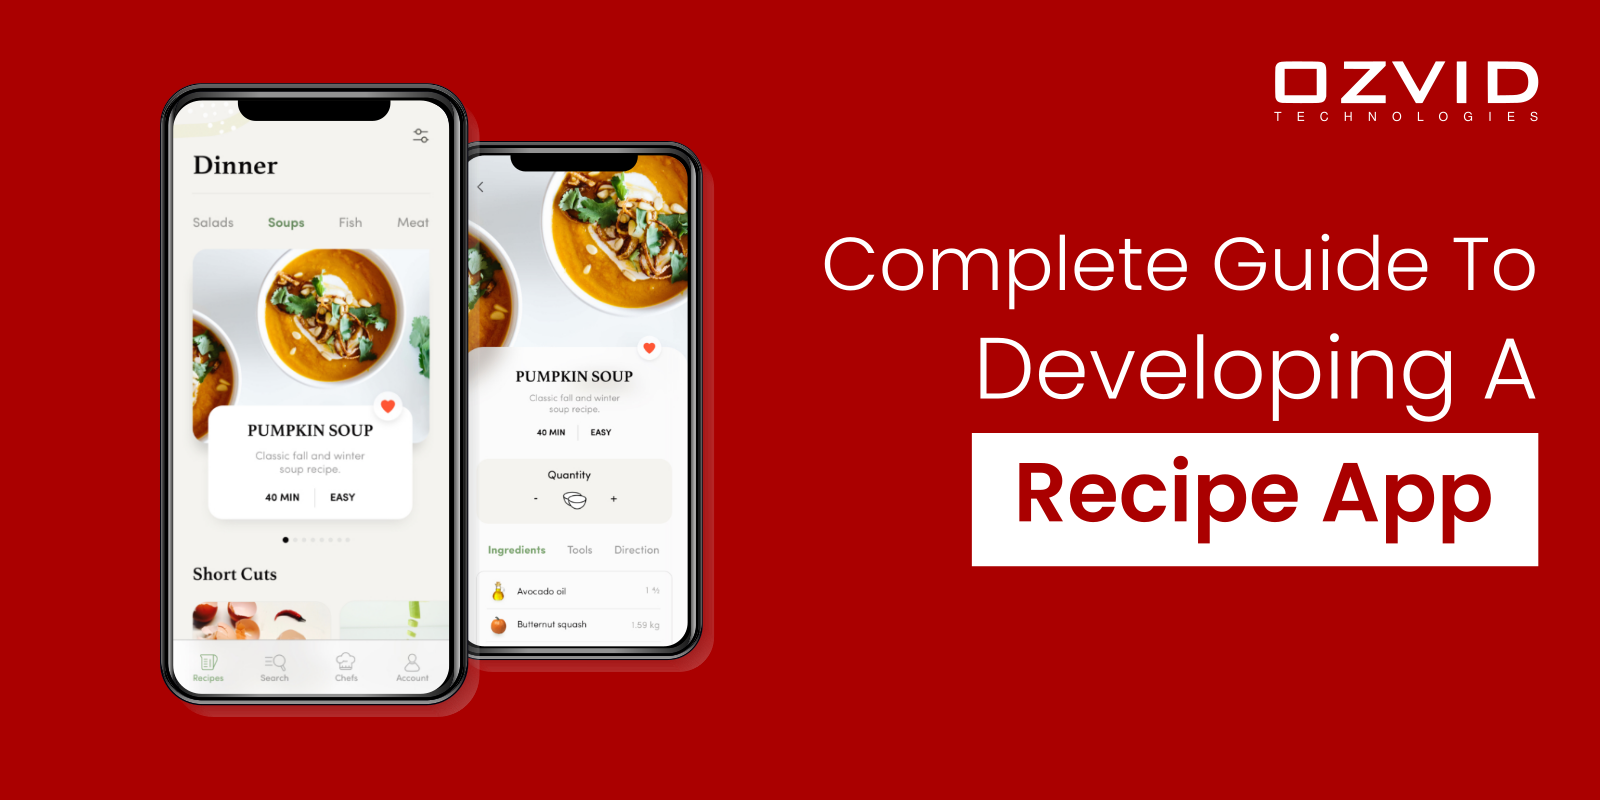 Complete Guide To Developing A Recipe App: Cost, Features, And Benefits